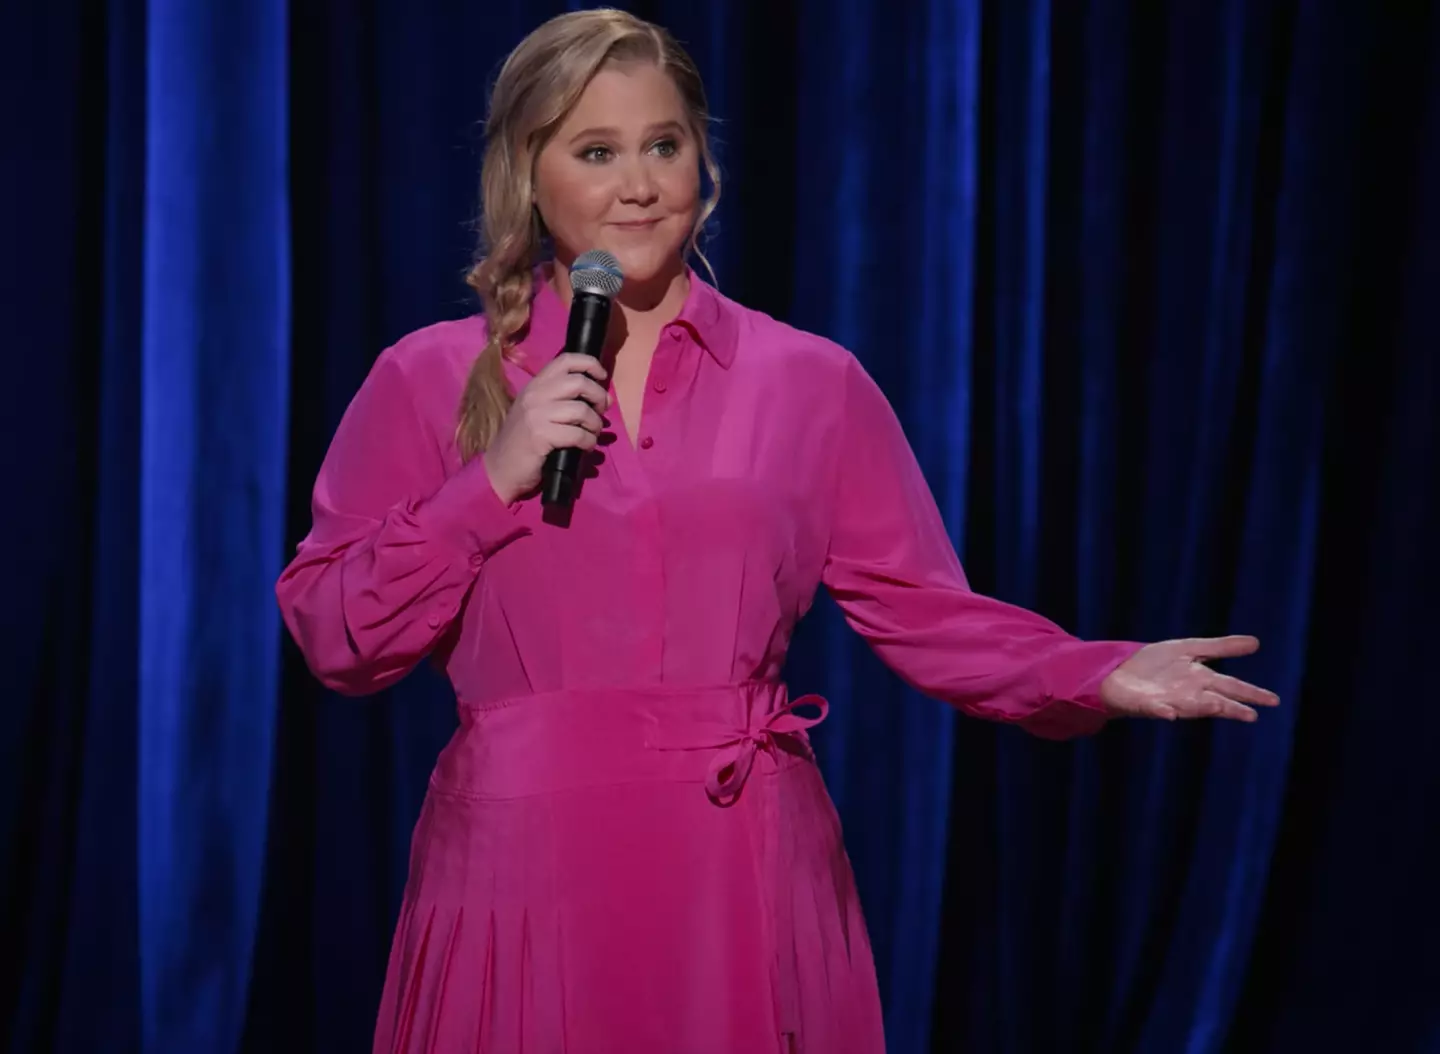 The stand-up special, Amy Schumer: Emergency Contact, was released yesterday (13 June).